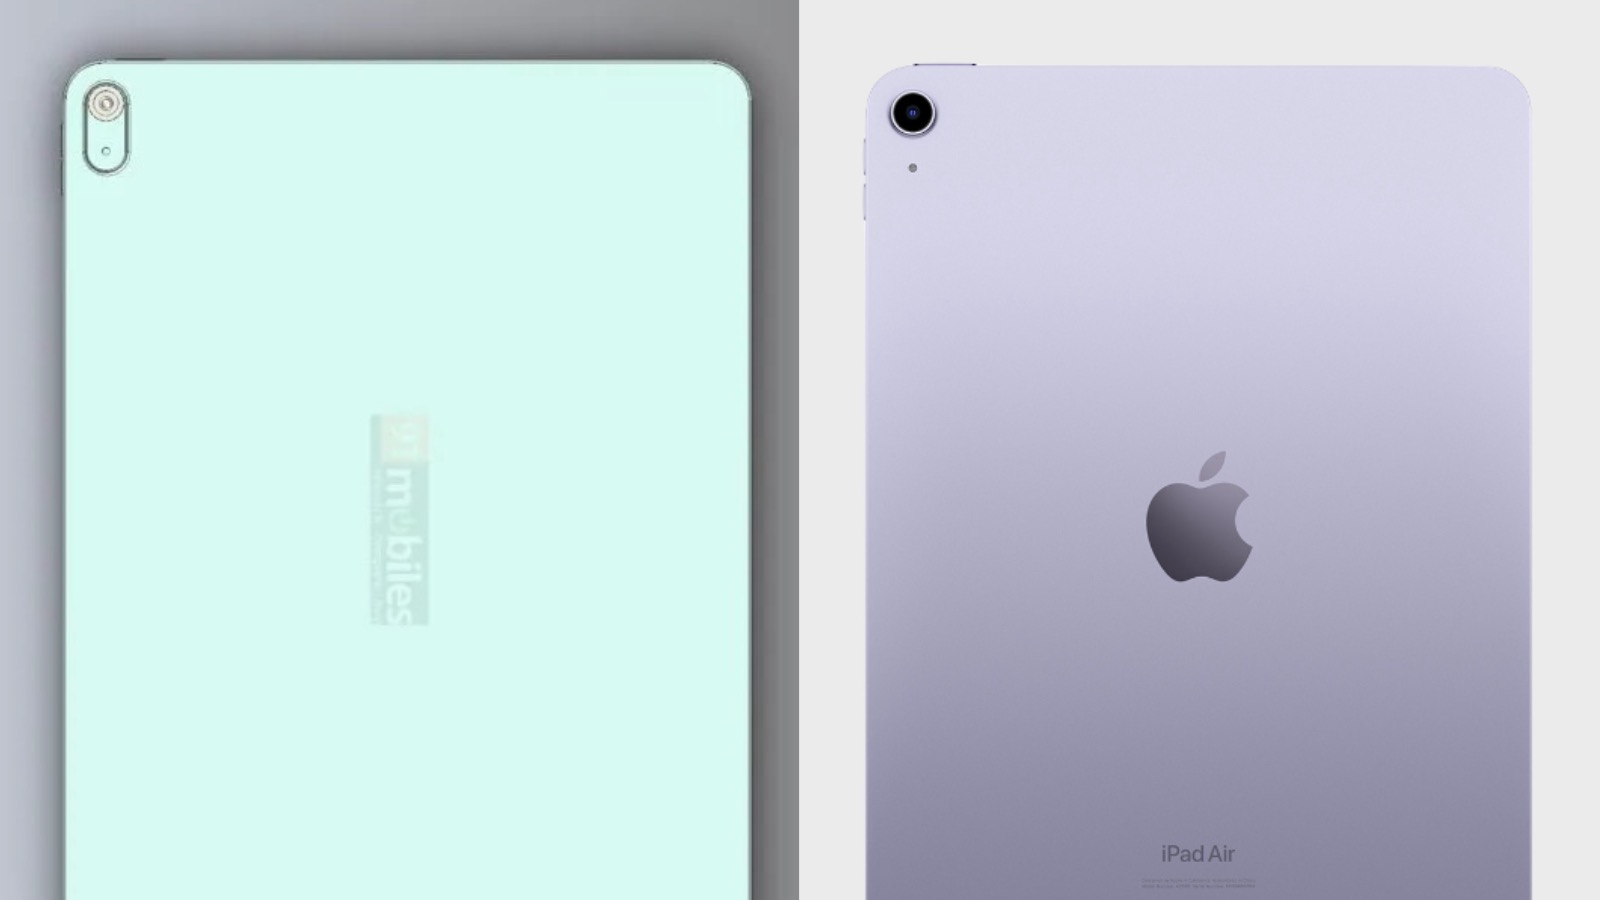 ipad-air-new-and-now.jpg